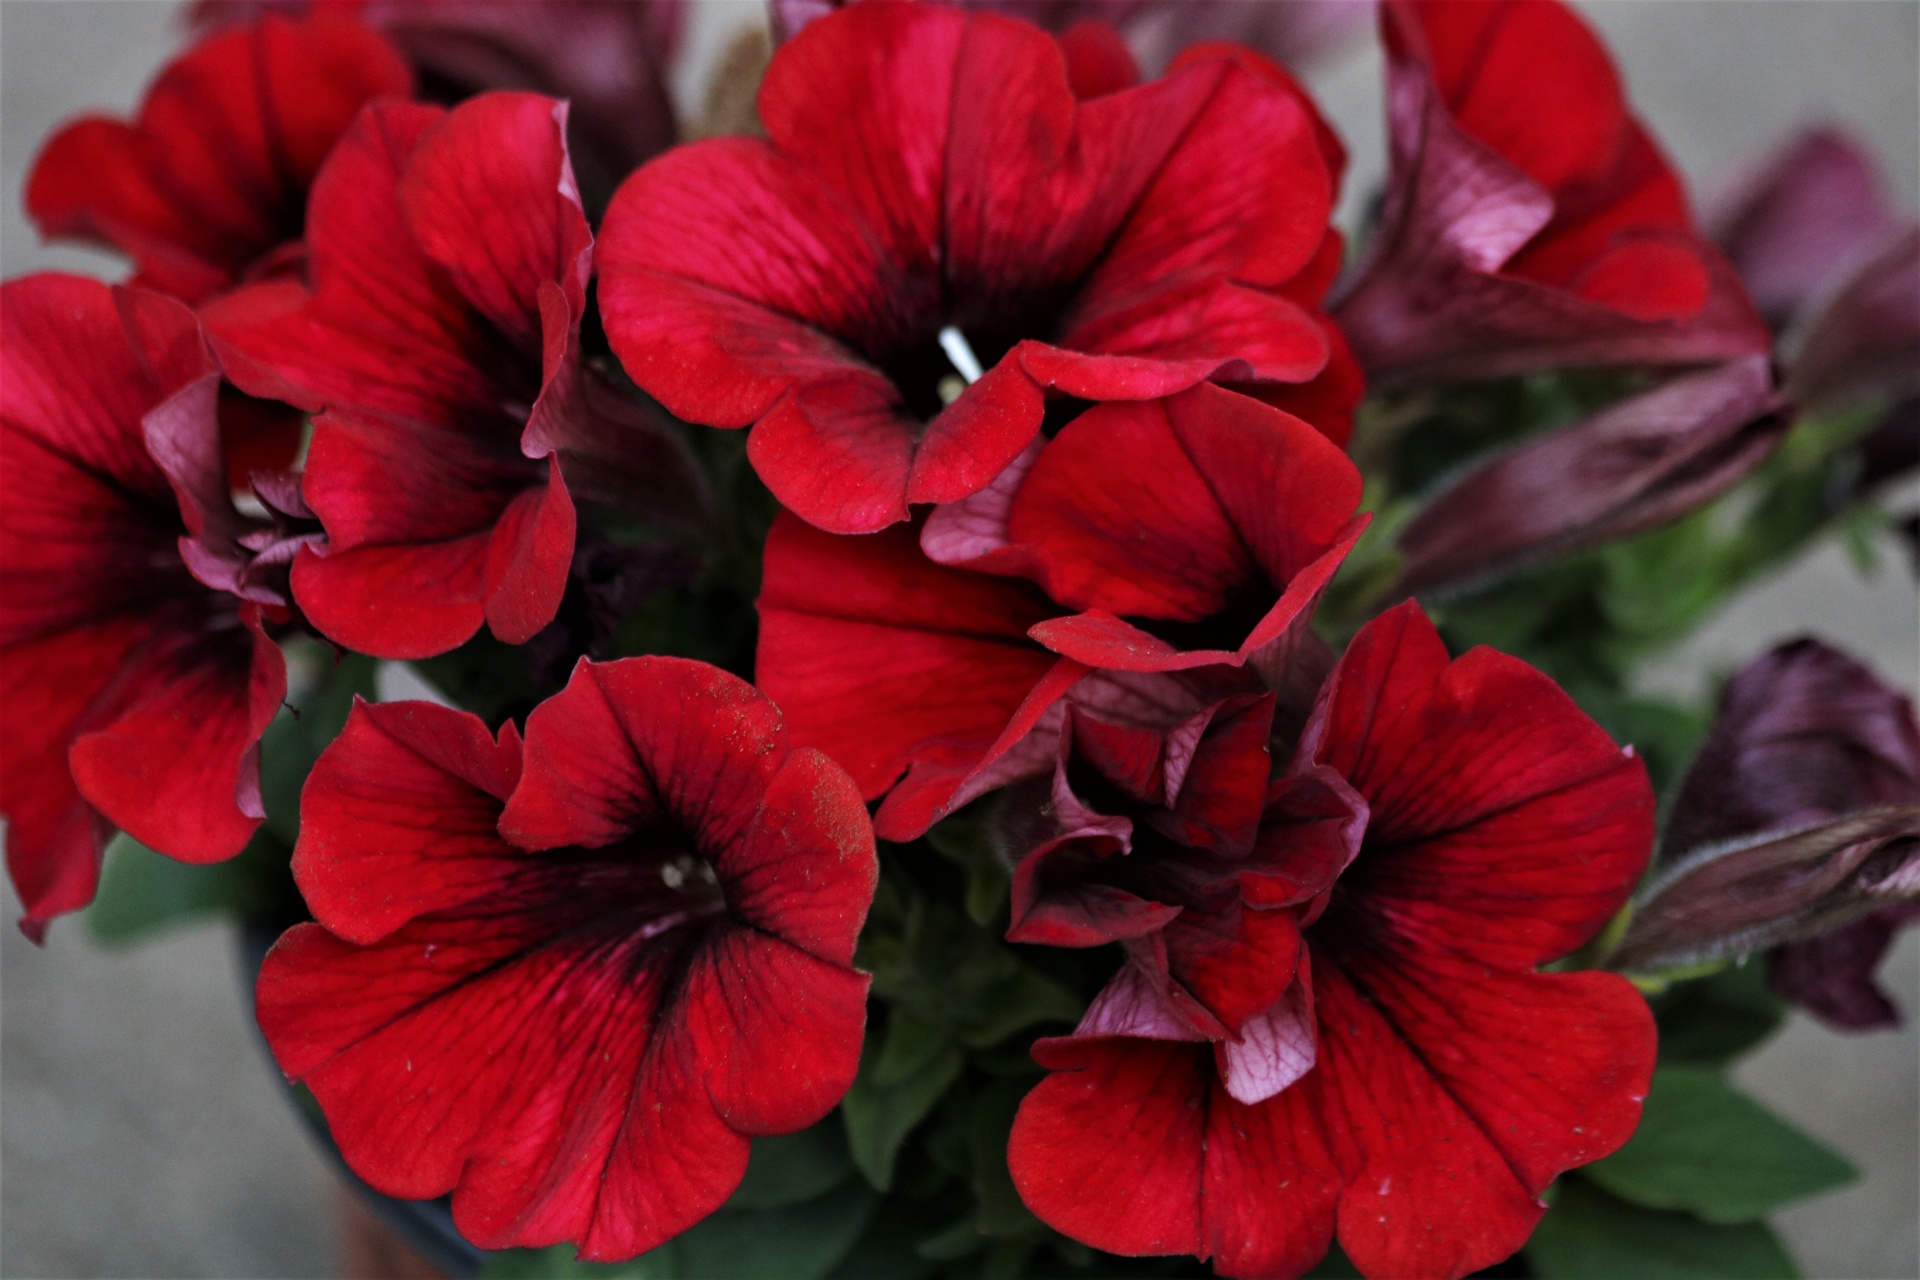 Red Petunia Flowers Close-up